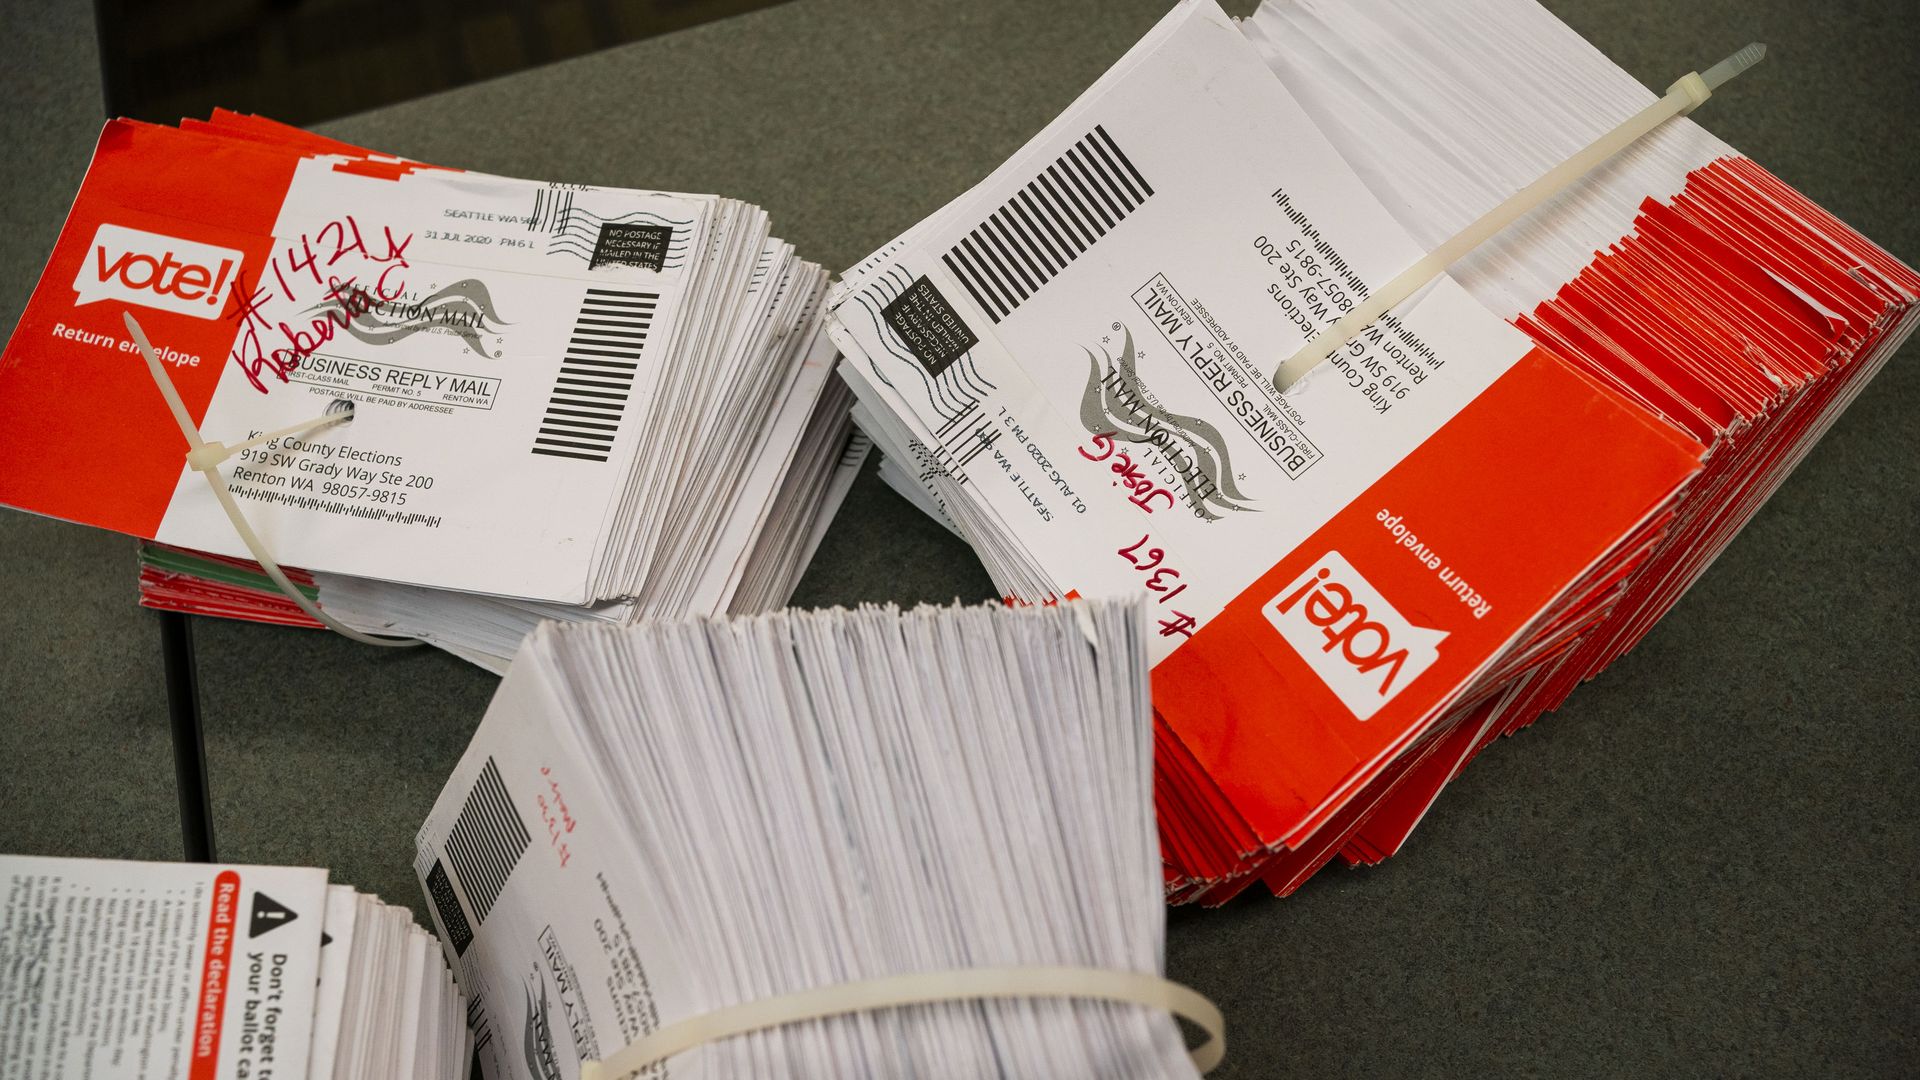  A stack of primary mail-in ballots held together by rubber bands